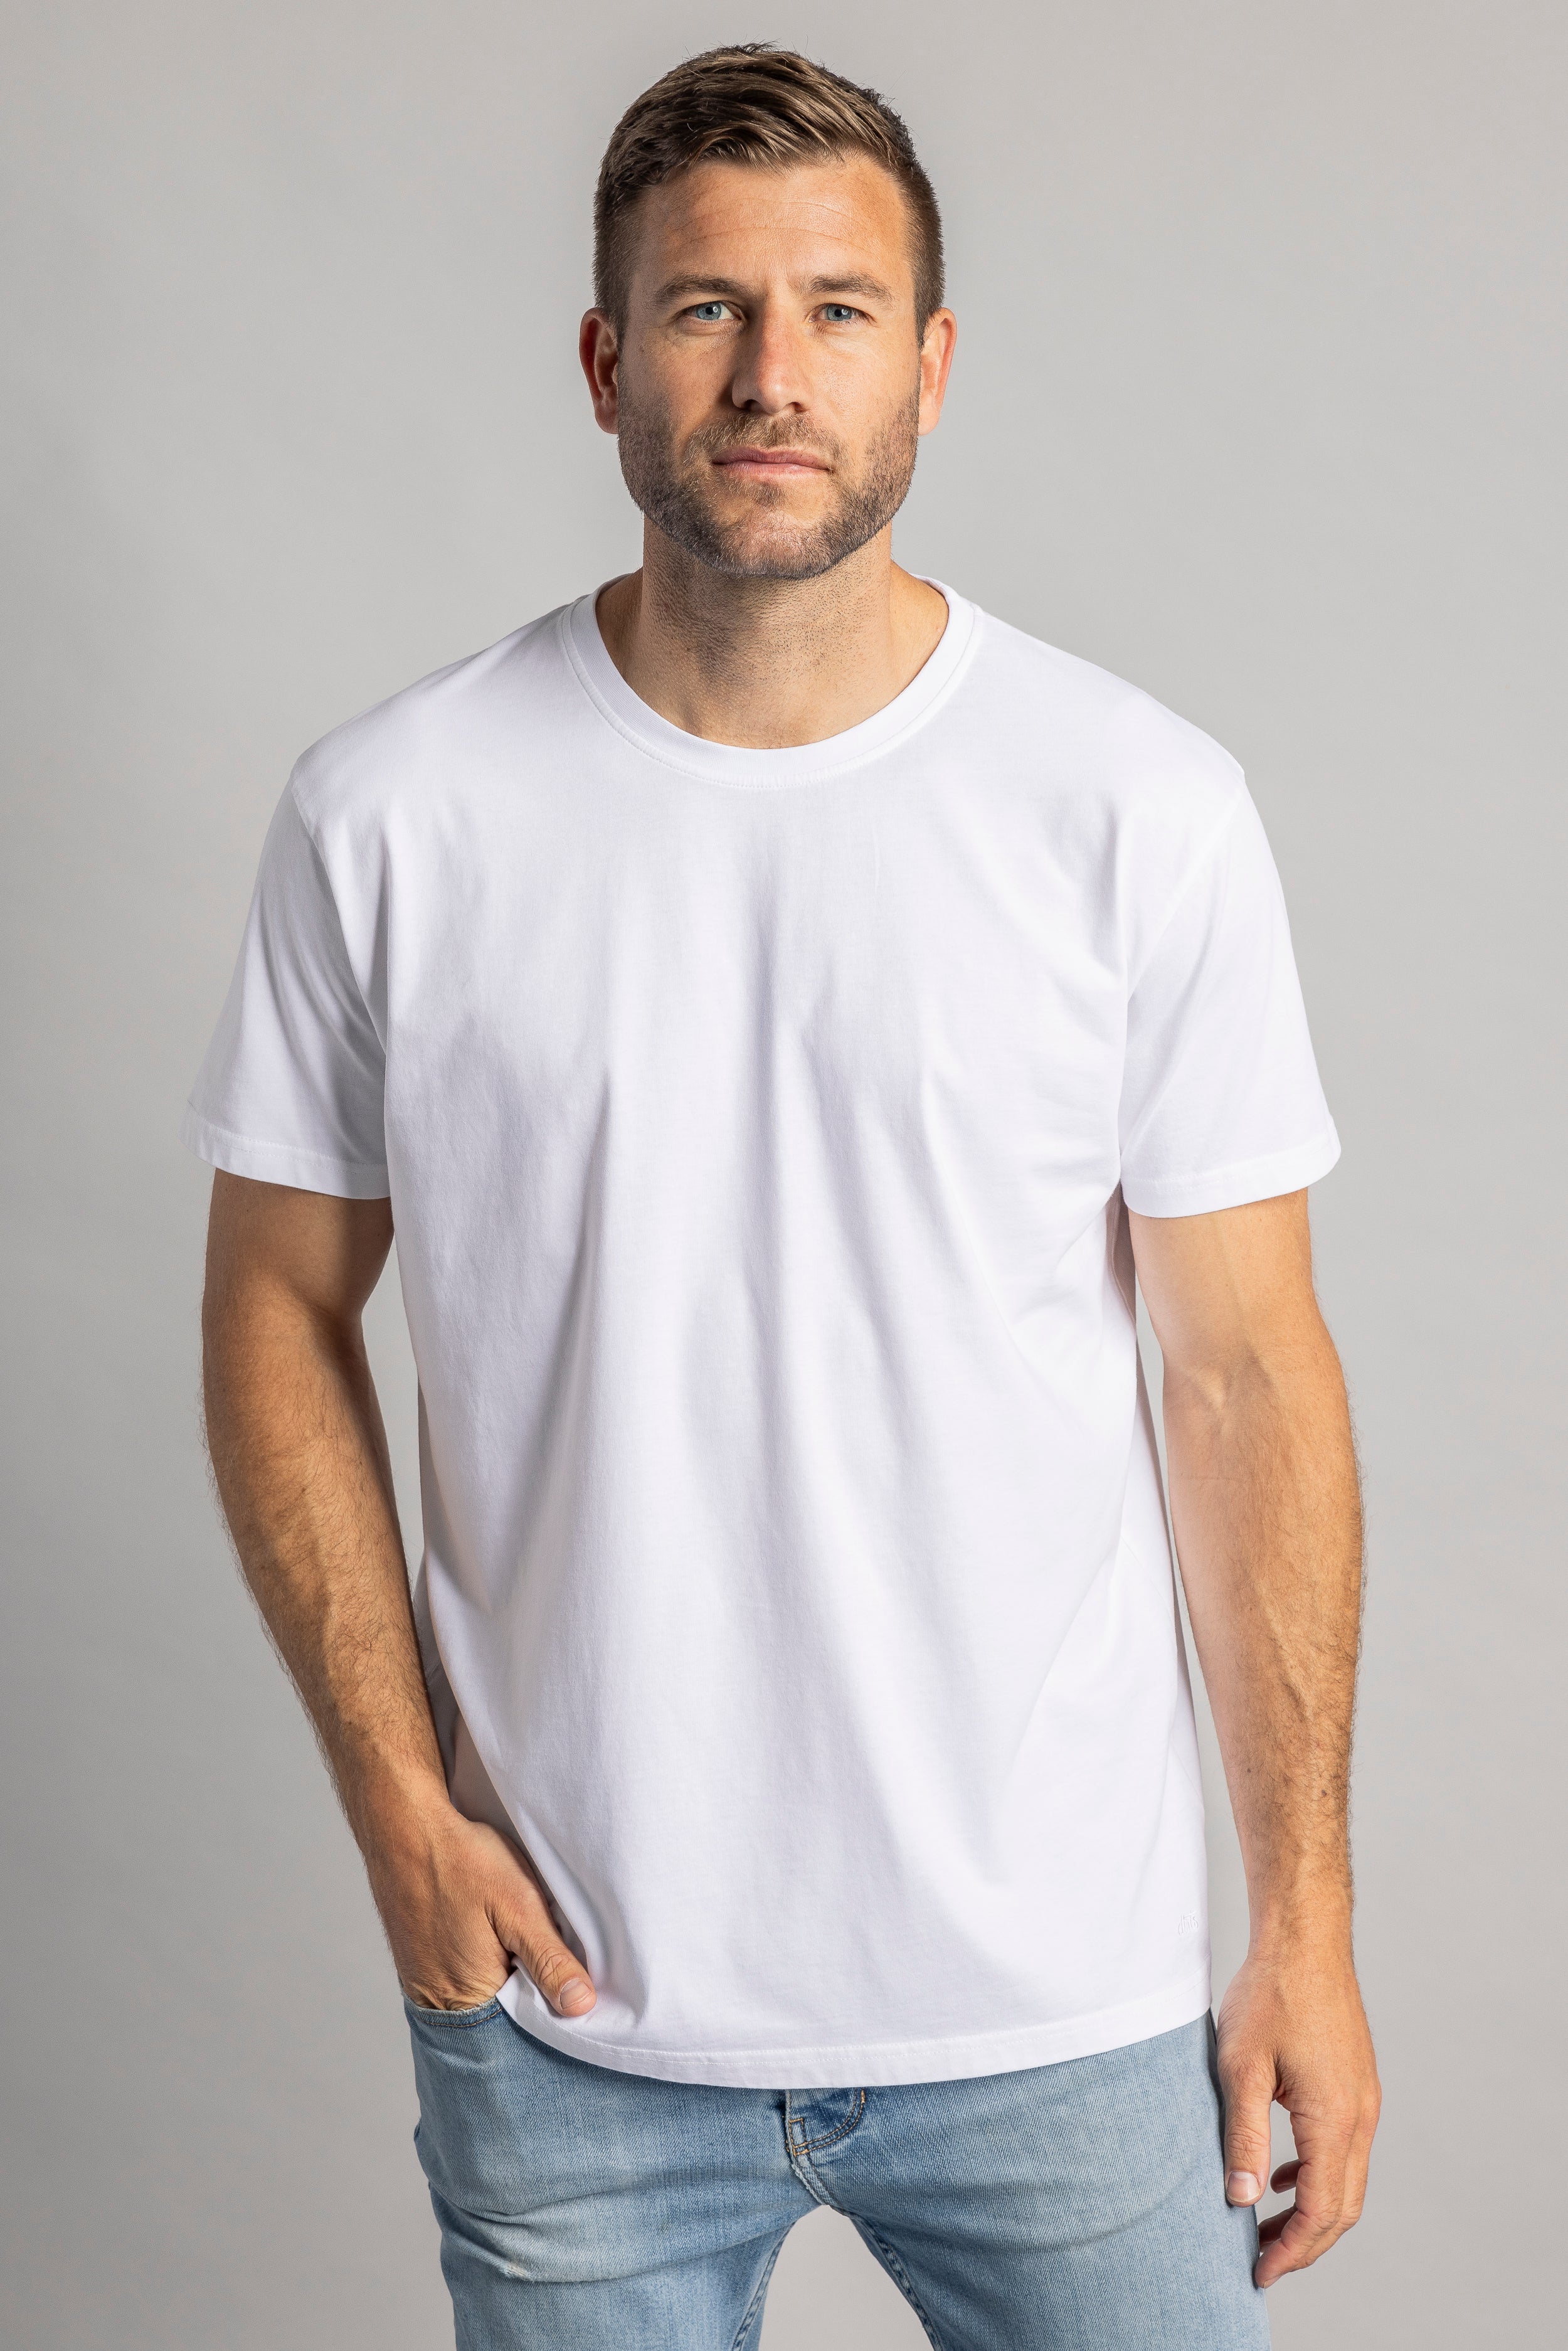 White T-shirt Premium Blank Standard made from 100% organic cotton from DIRTS